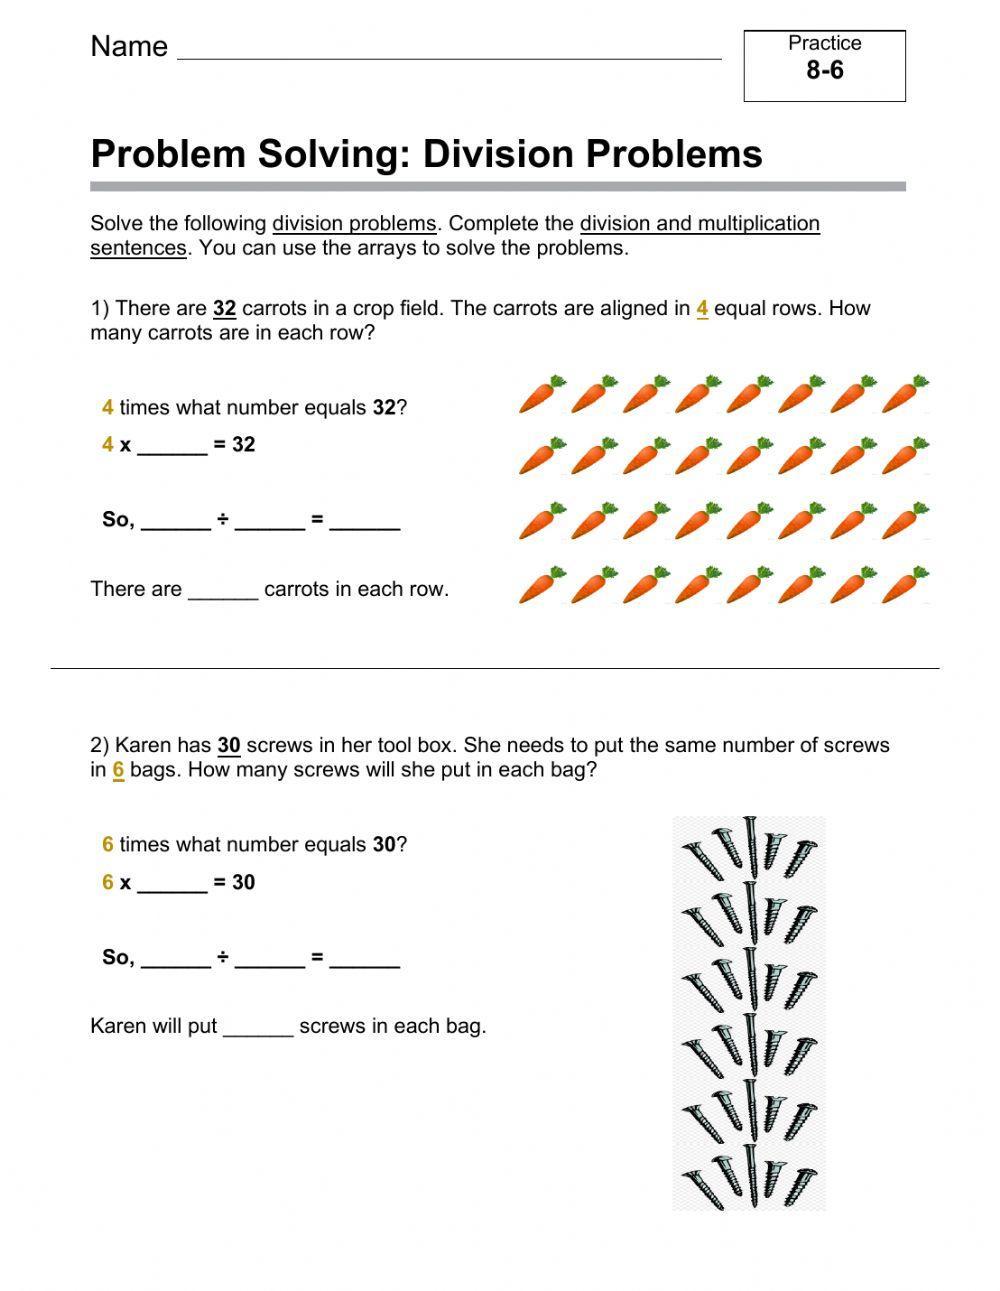 Problem Solving with Division